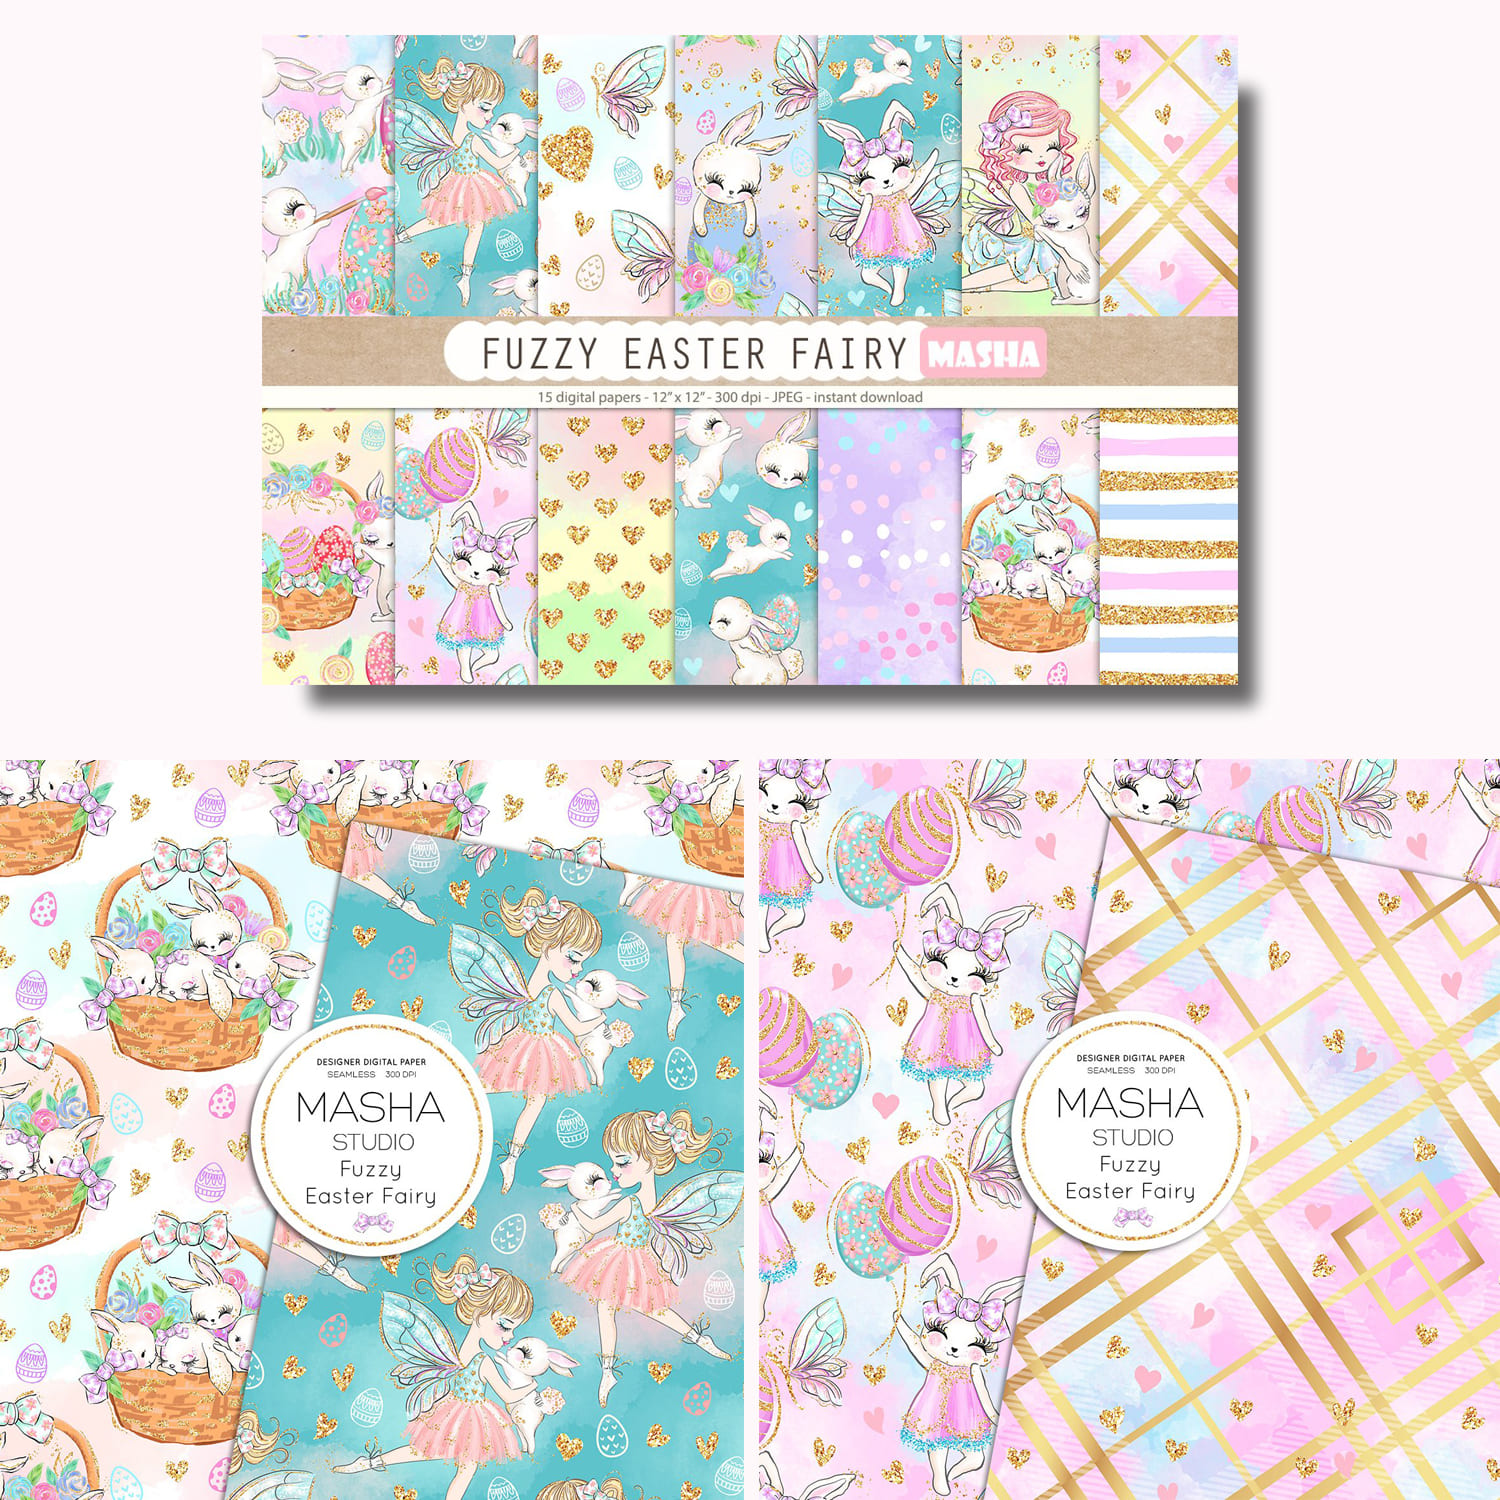 FUZZY EASTER FAIRY digital papers.